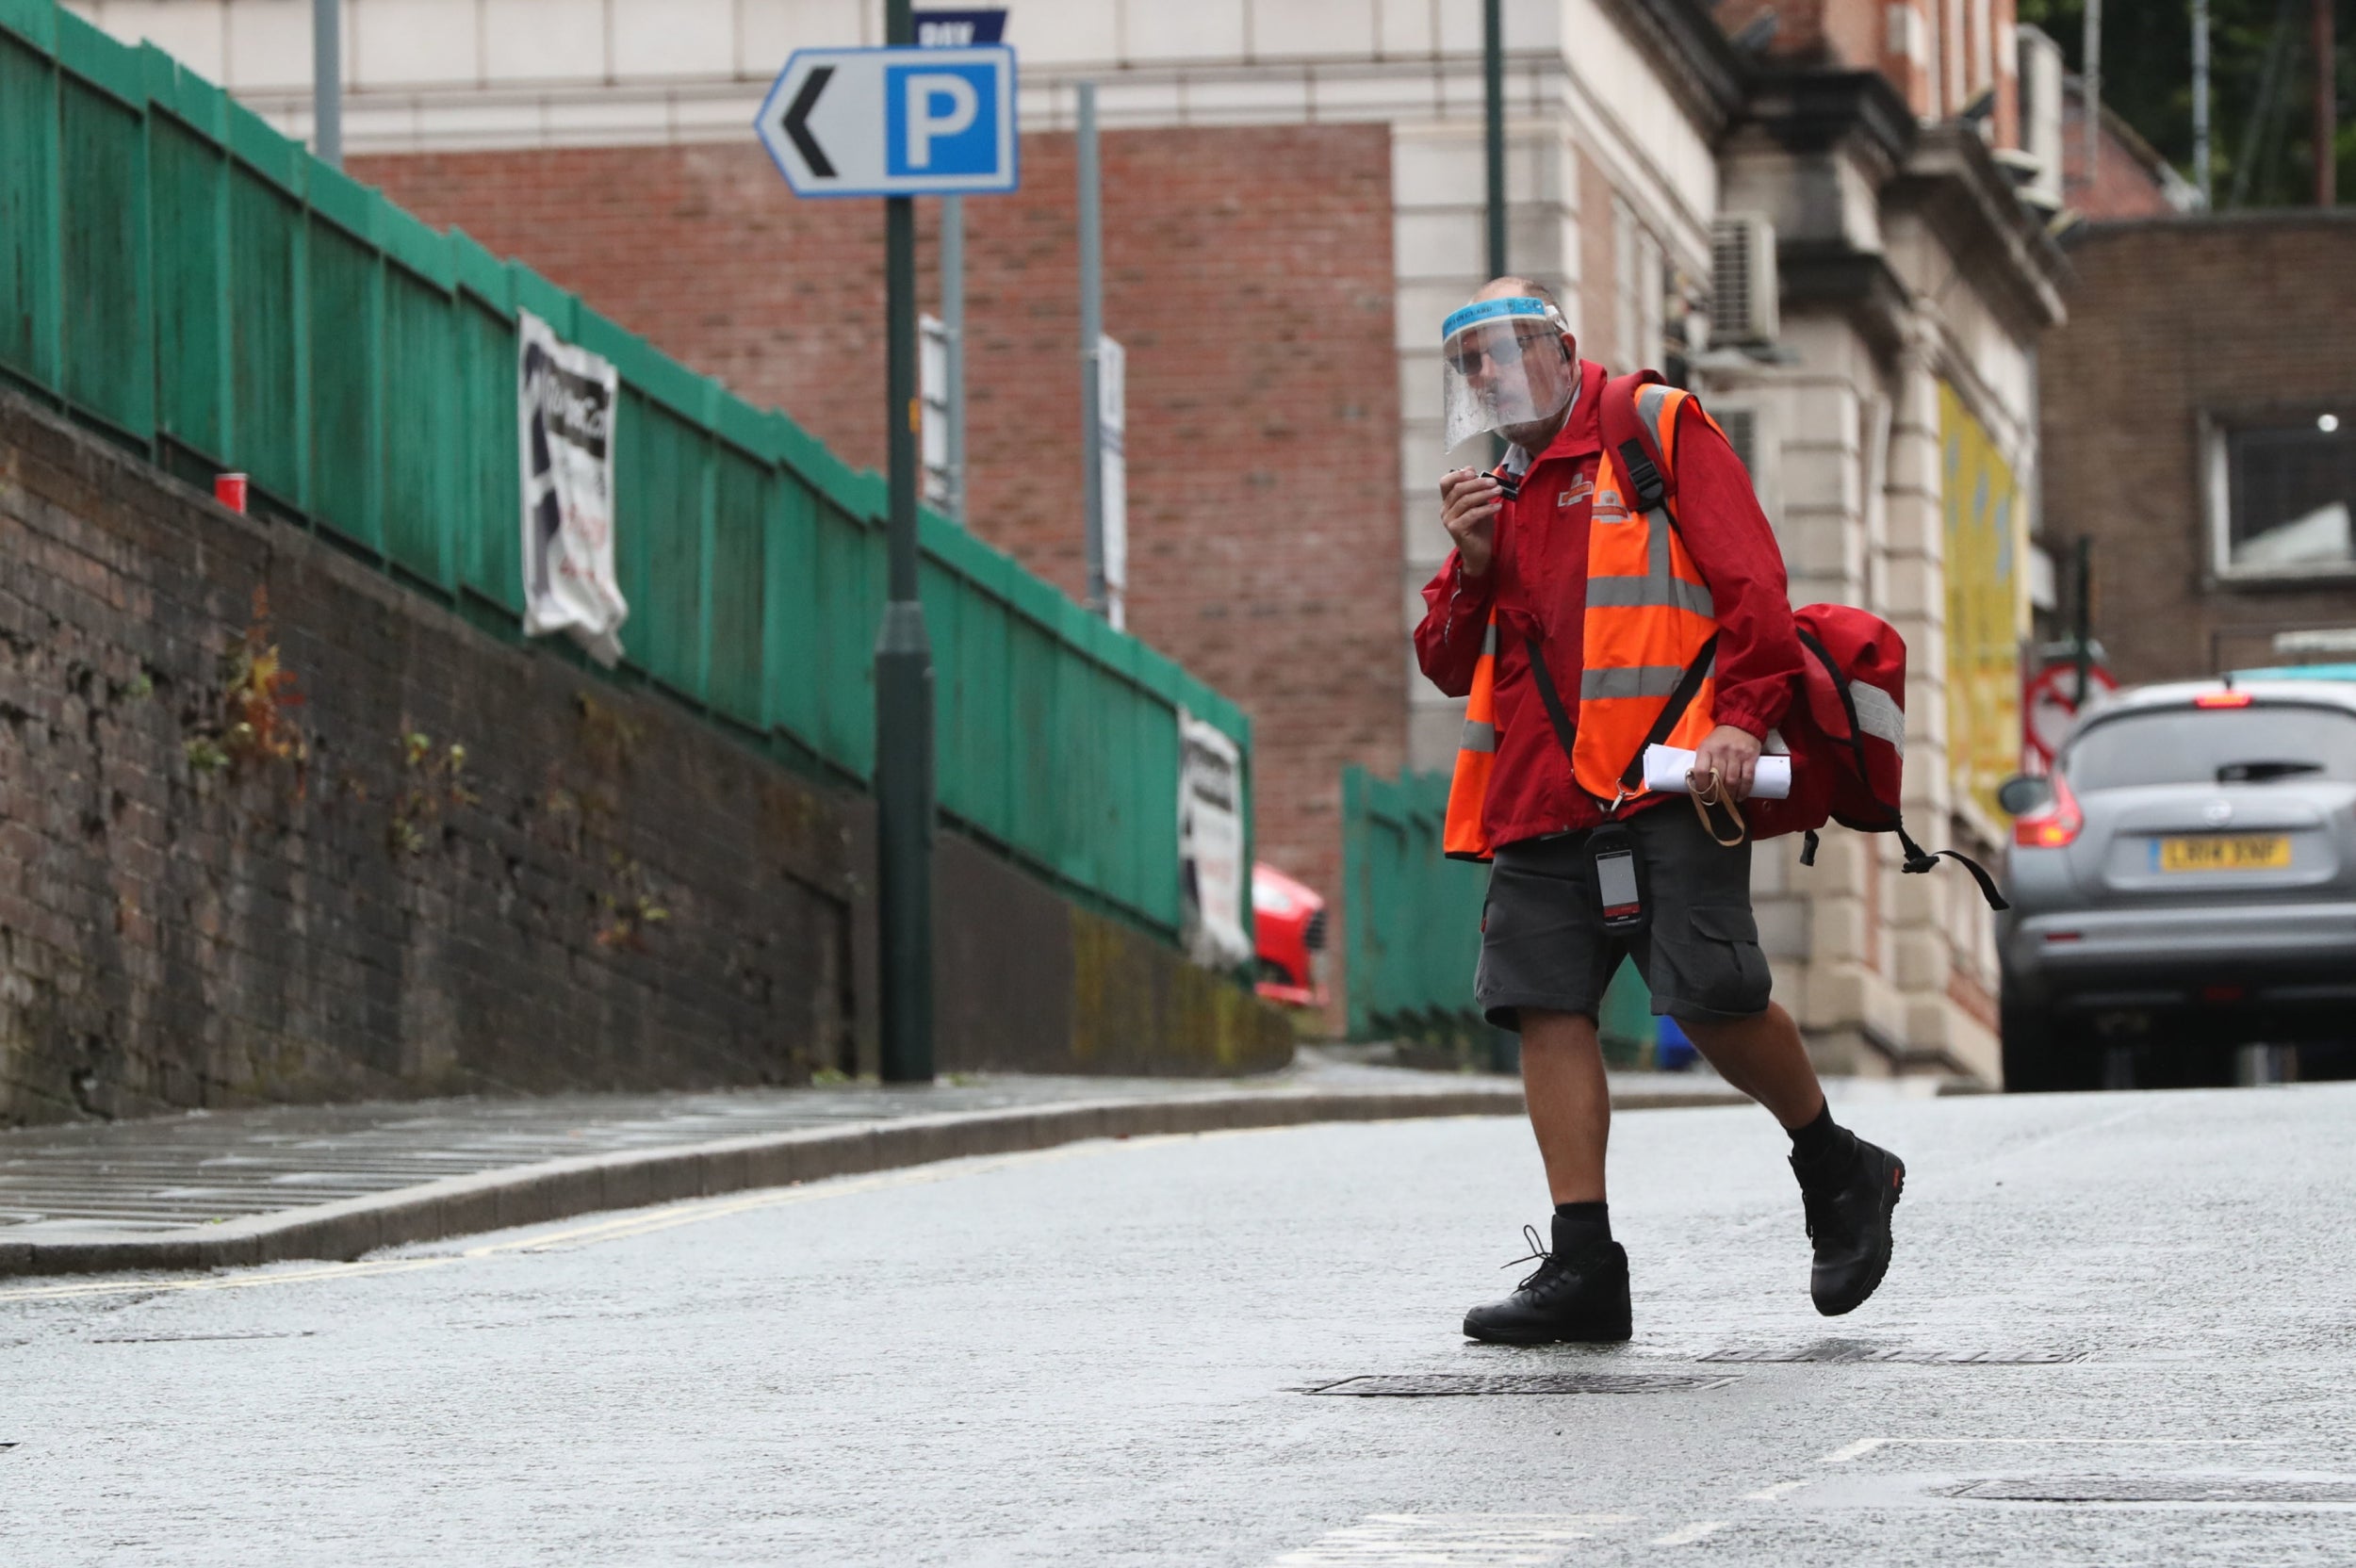 Postman in Greater Manchester